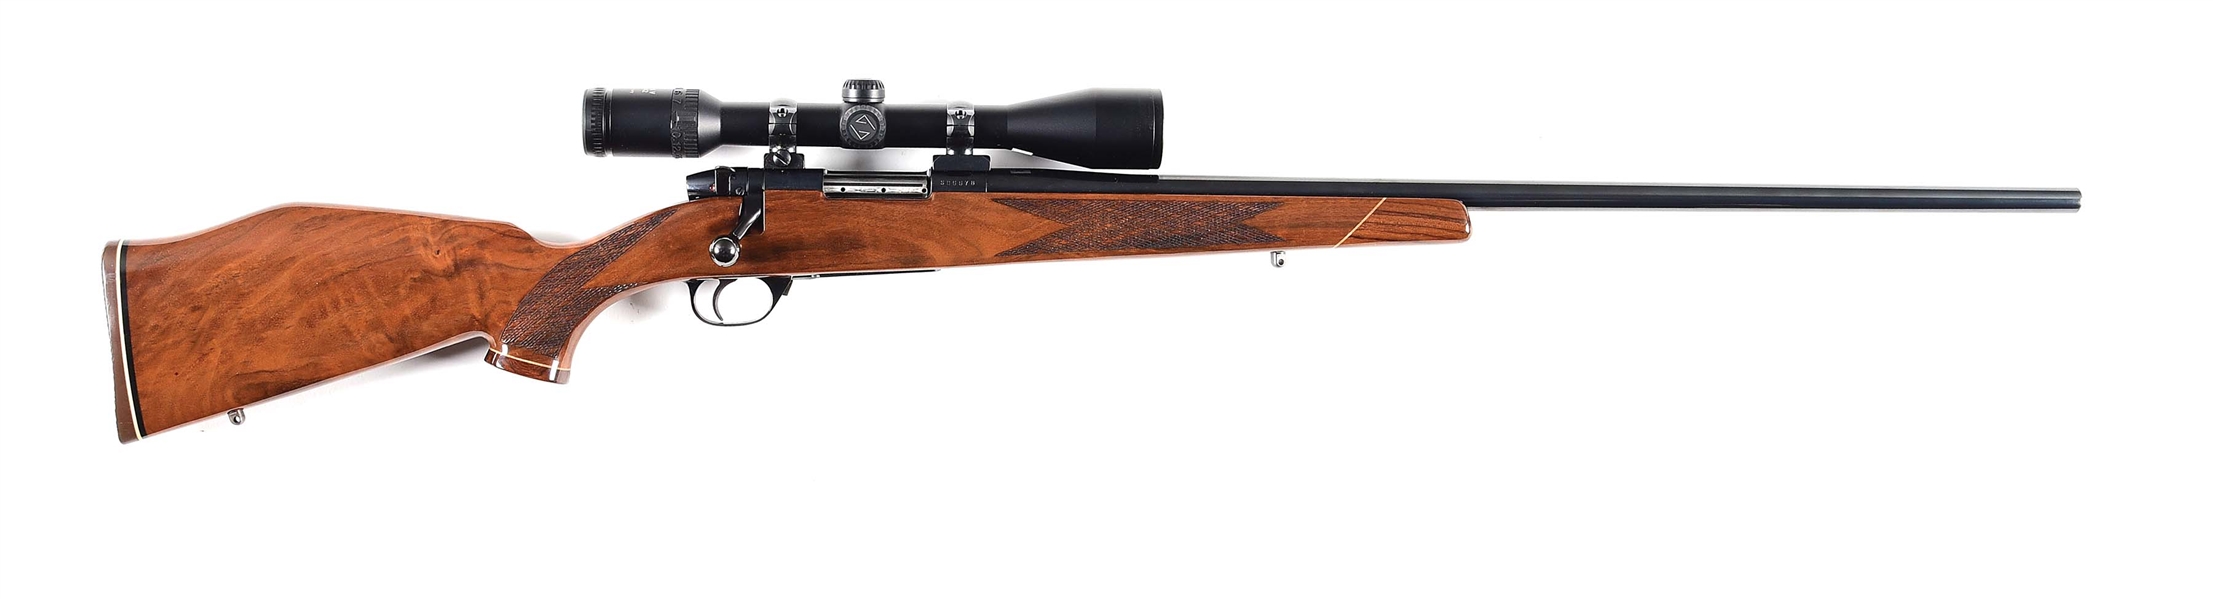 (M) WEATHERBY MARK V BOLT ACTION .224 WEATHERBY MAGNUM RIFLE WITH SCOPE.